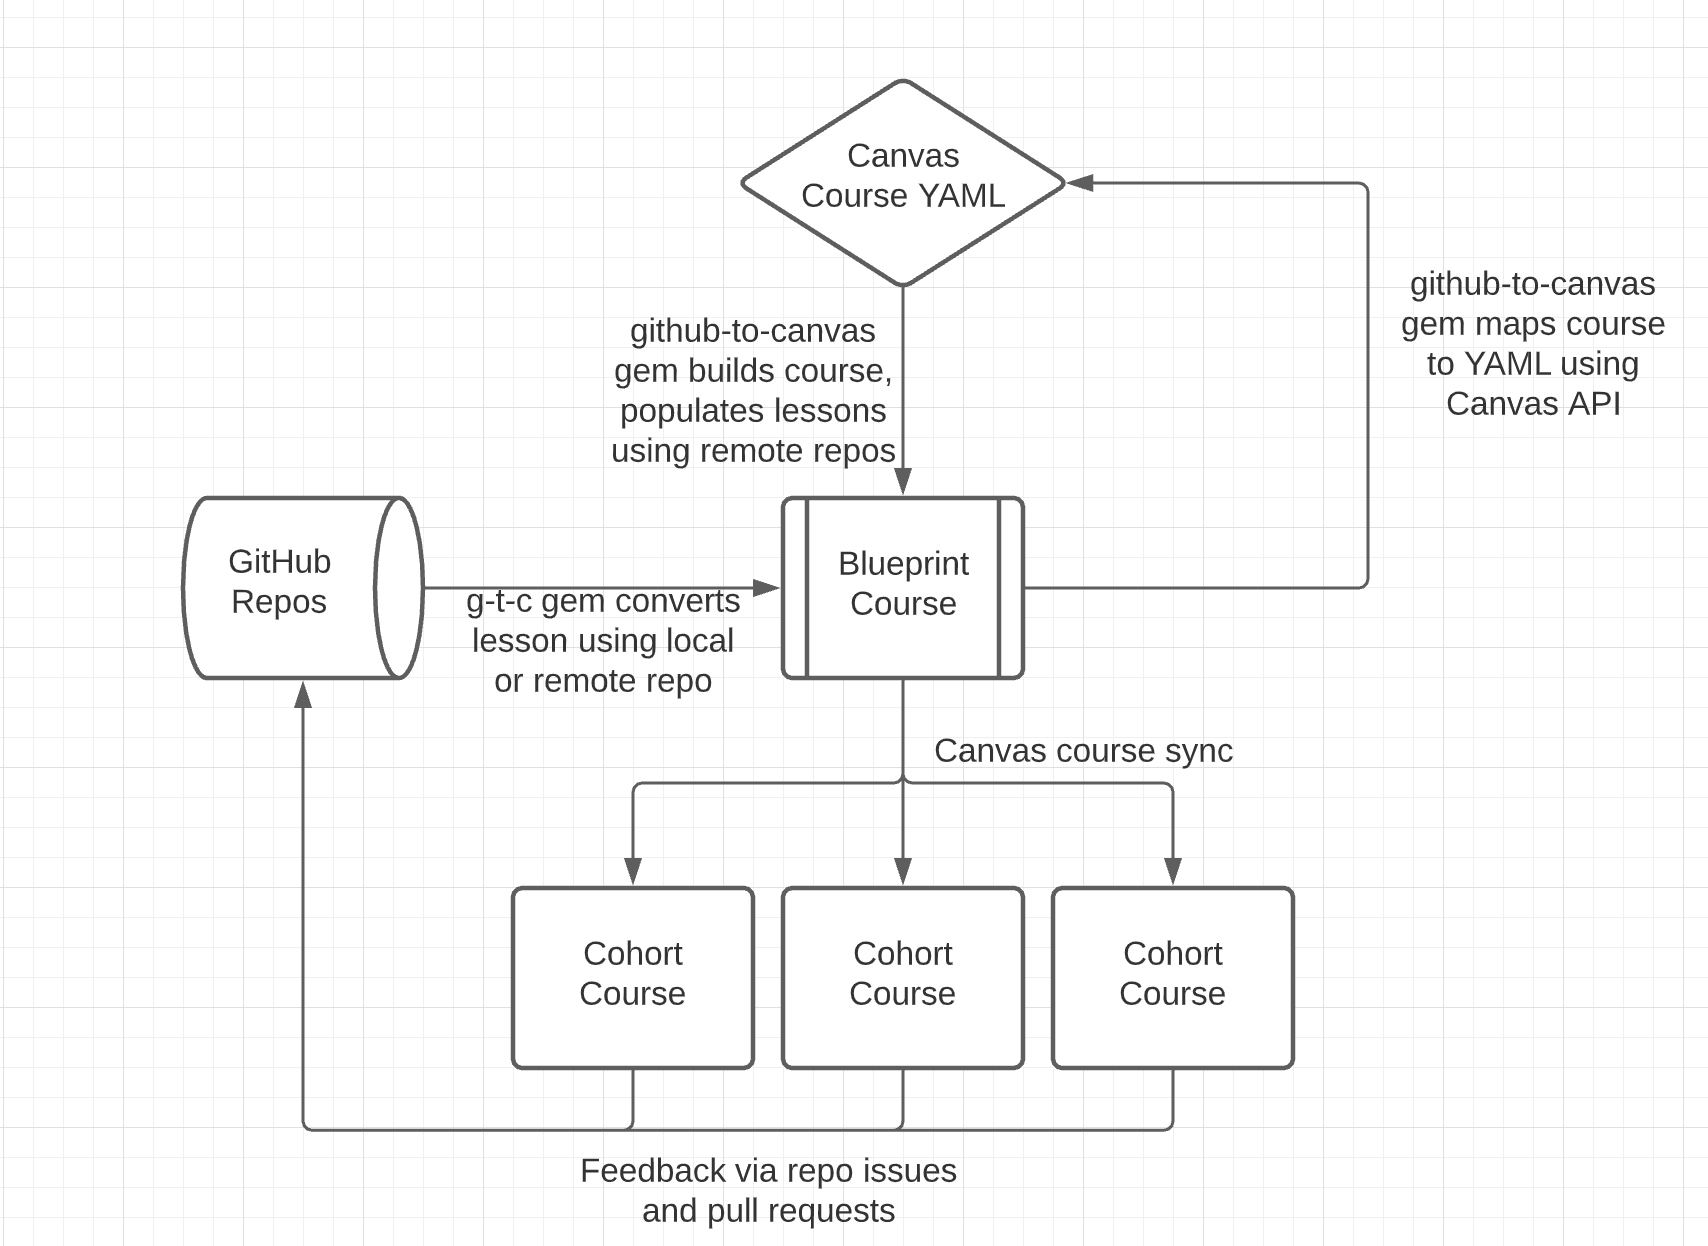 github-to-canvas workflow chart